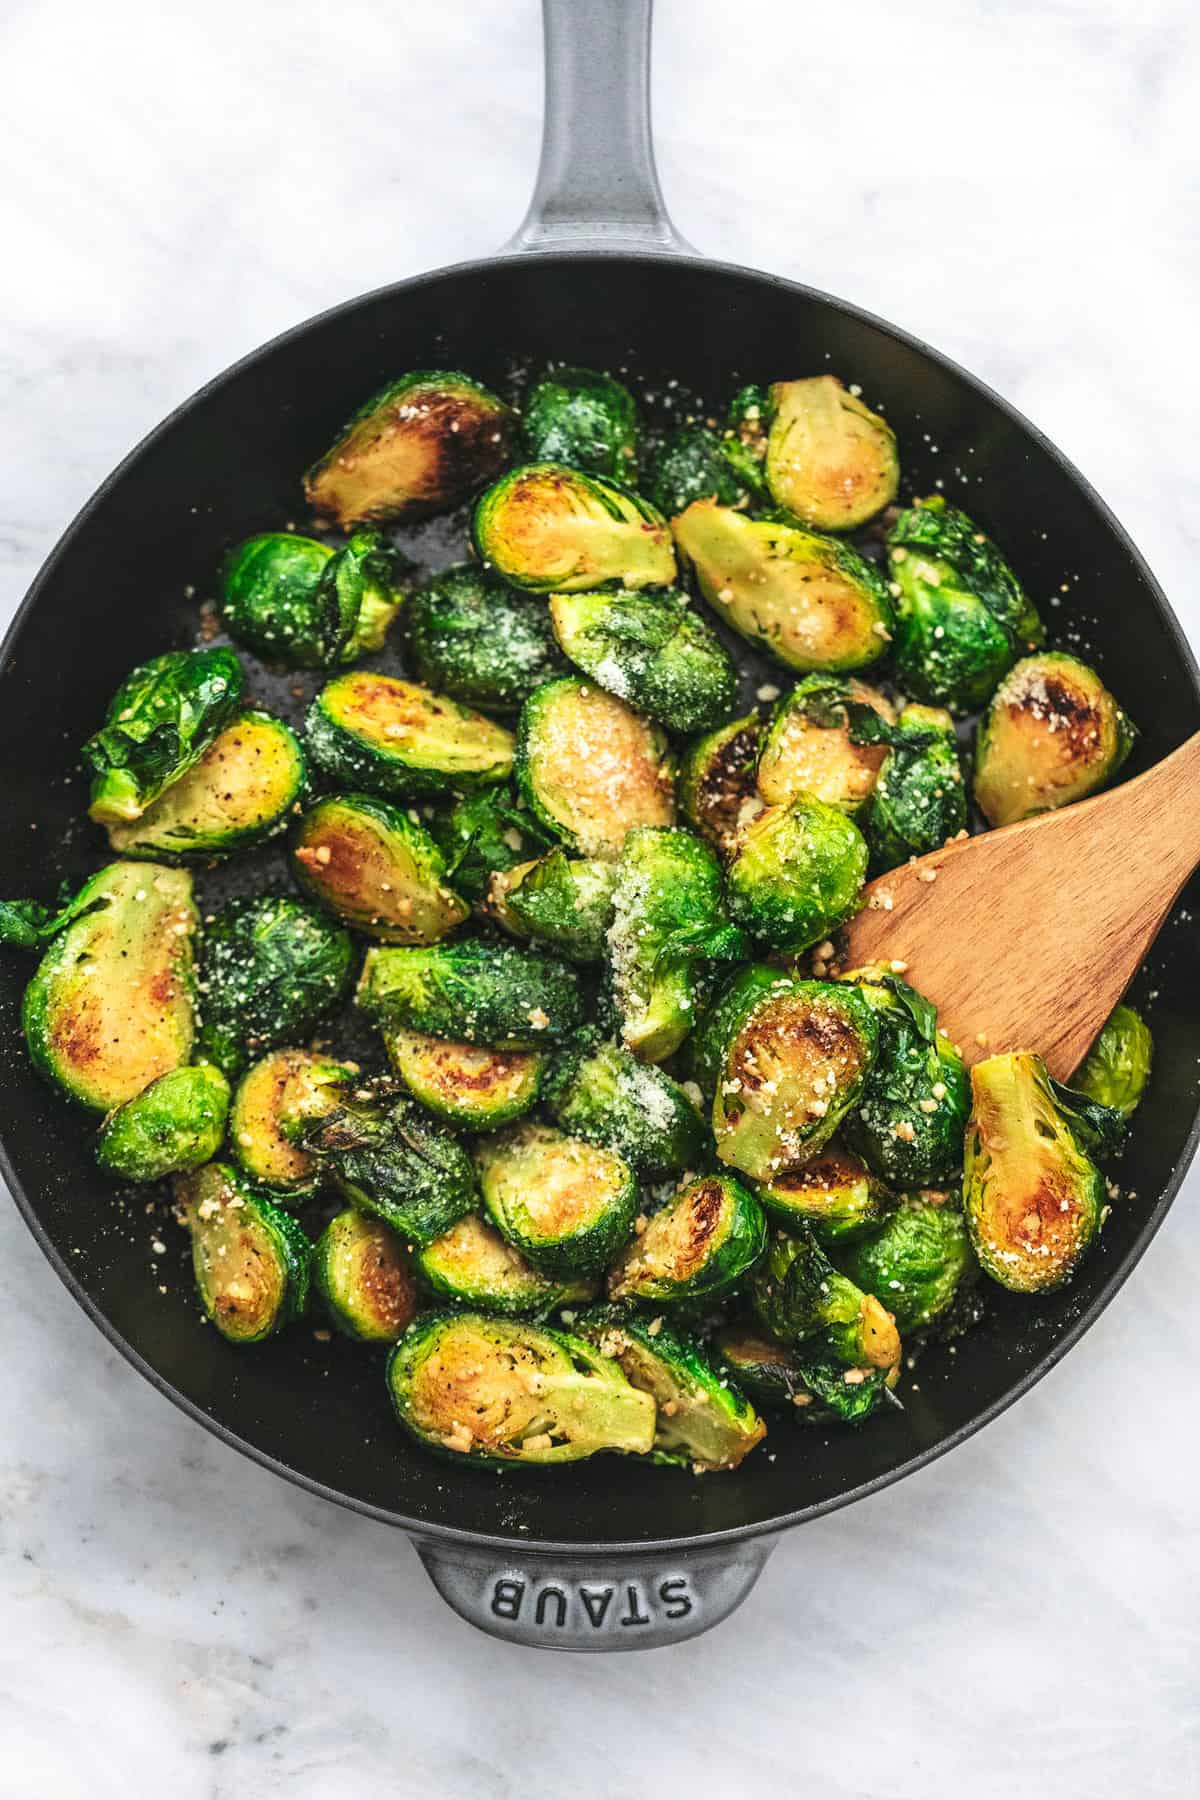 Sauteed Brussels Sprouts Recipe easy side dish with parmesan and garlic | lecremedelacrumb.com